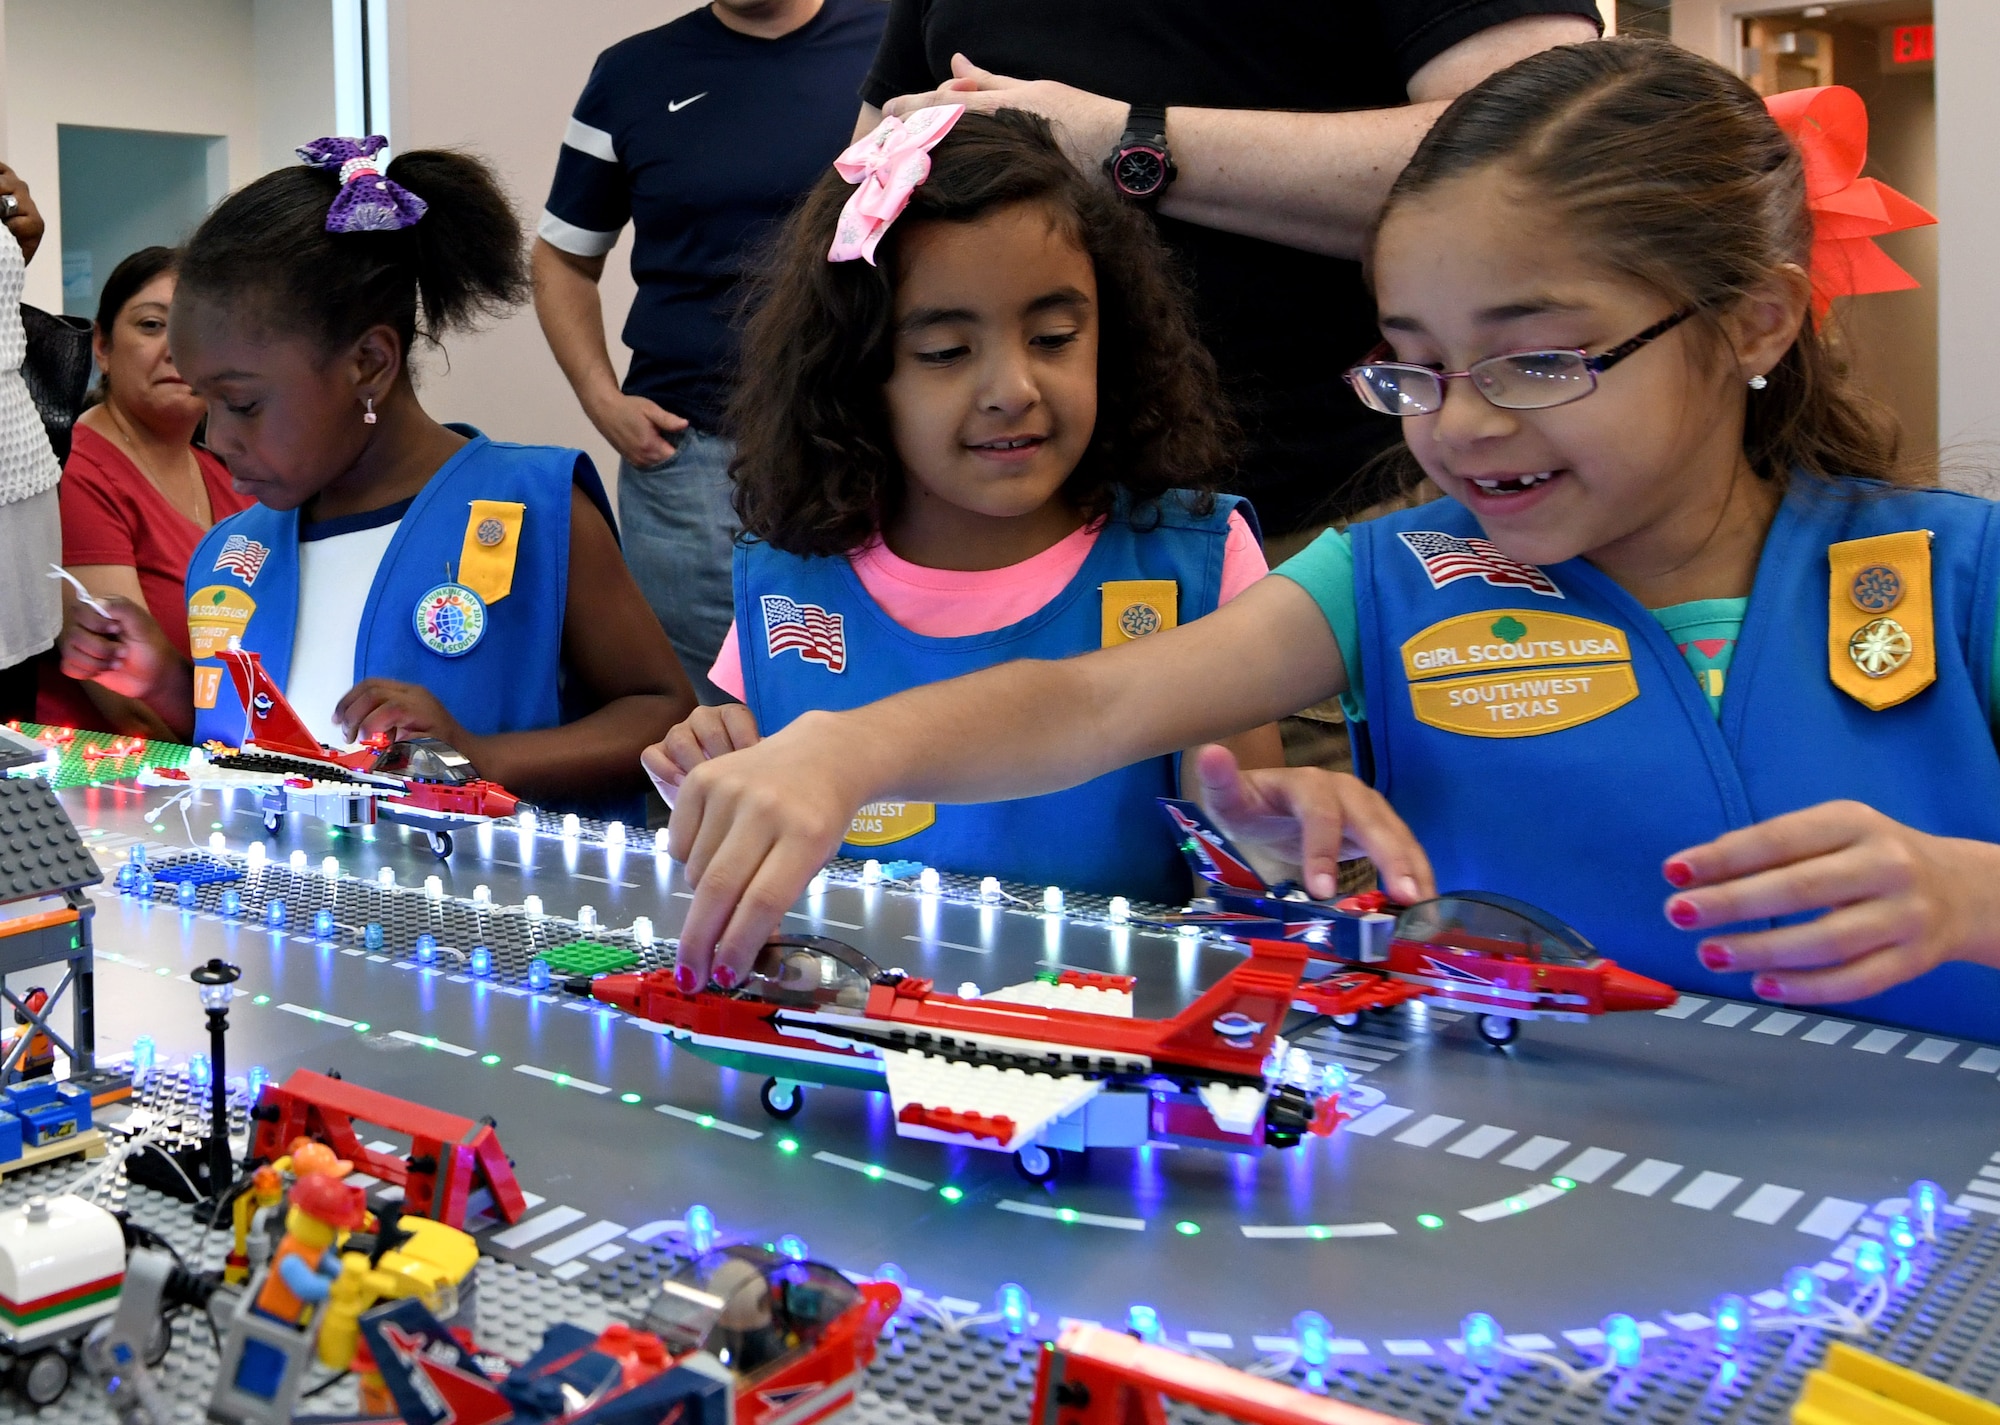 San Antonio-area Girl Scouts visit the 90th Cyberspace Operations Squadron “Bricks in the Loop” for a tour April 19, 2019. “Bricks in the Loop” mimics an Air Force installation with items such as a fire station, police station, airport, jets and tanker trucks, all used to simulate real-world cyber systems in training cyber operators. (U.S. Air Force photo by Tech. Sgt. R.J. Biermann)